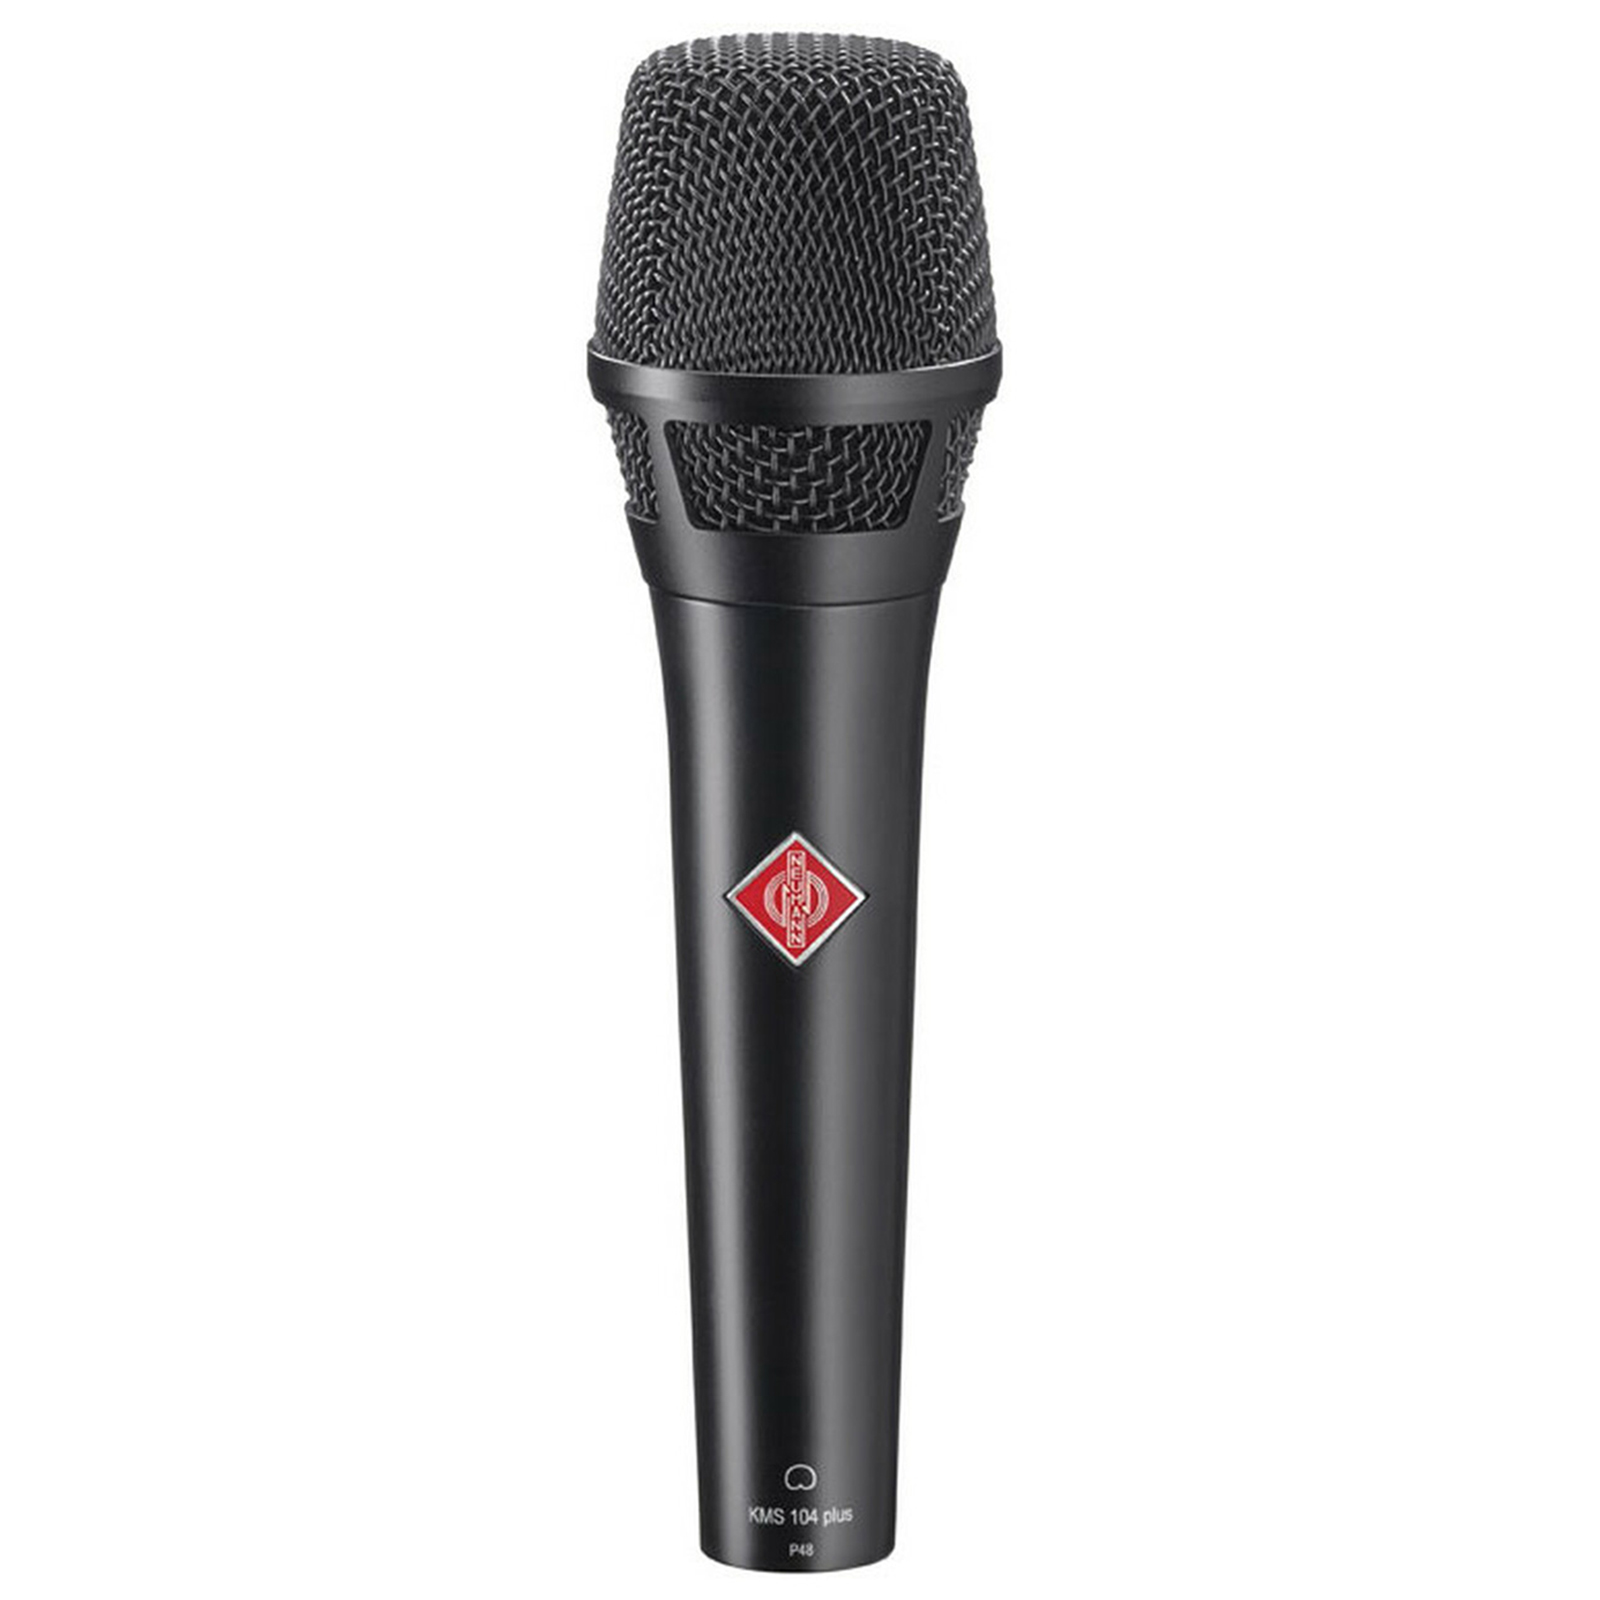 Image of Neumann KMS 104 Plus bk Vocal Microphone